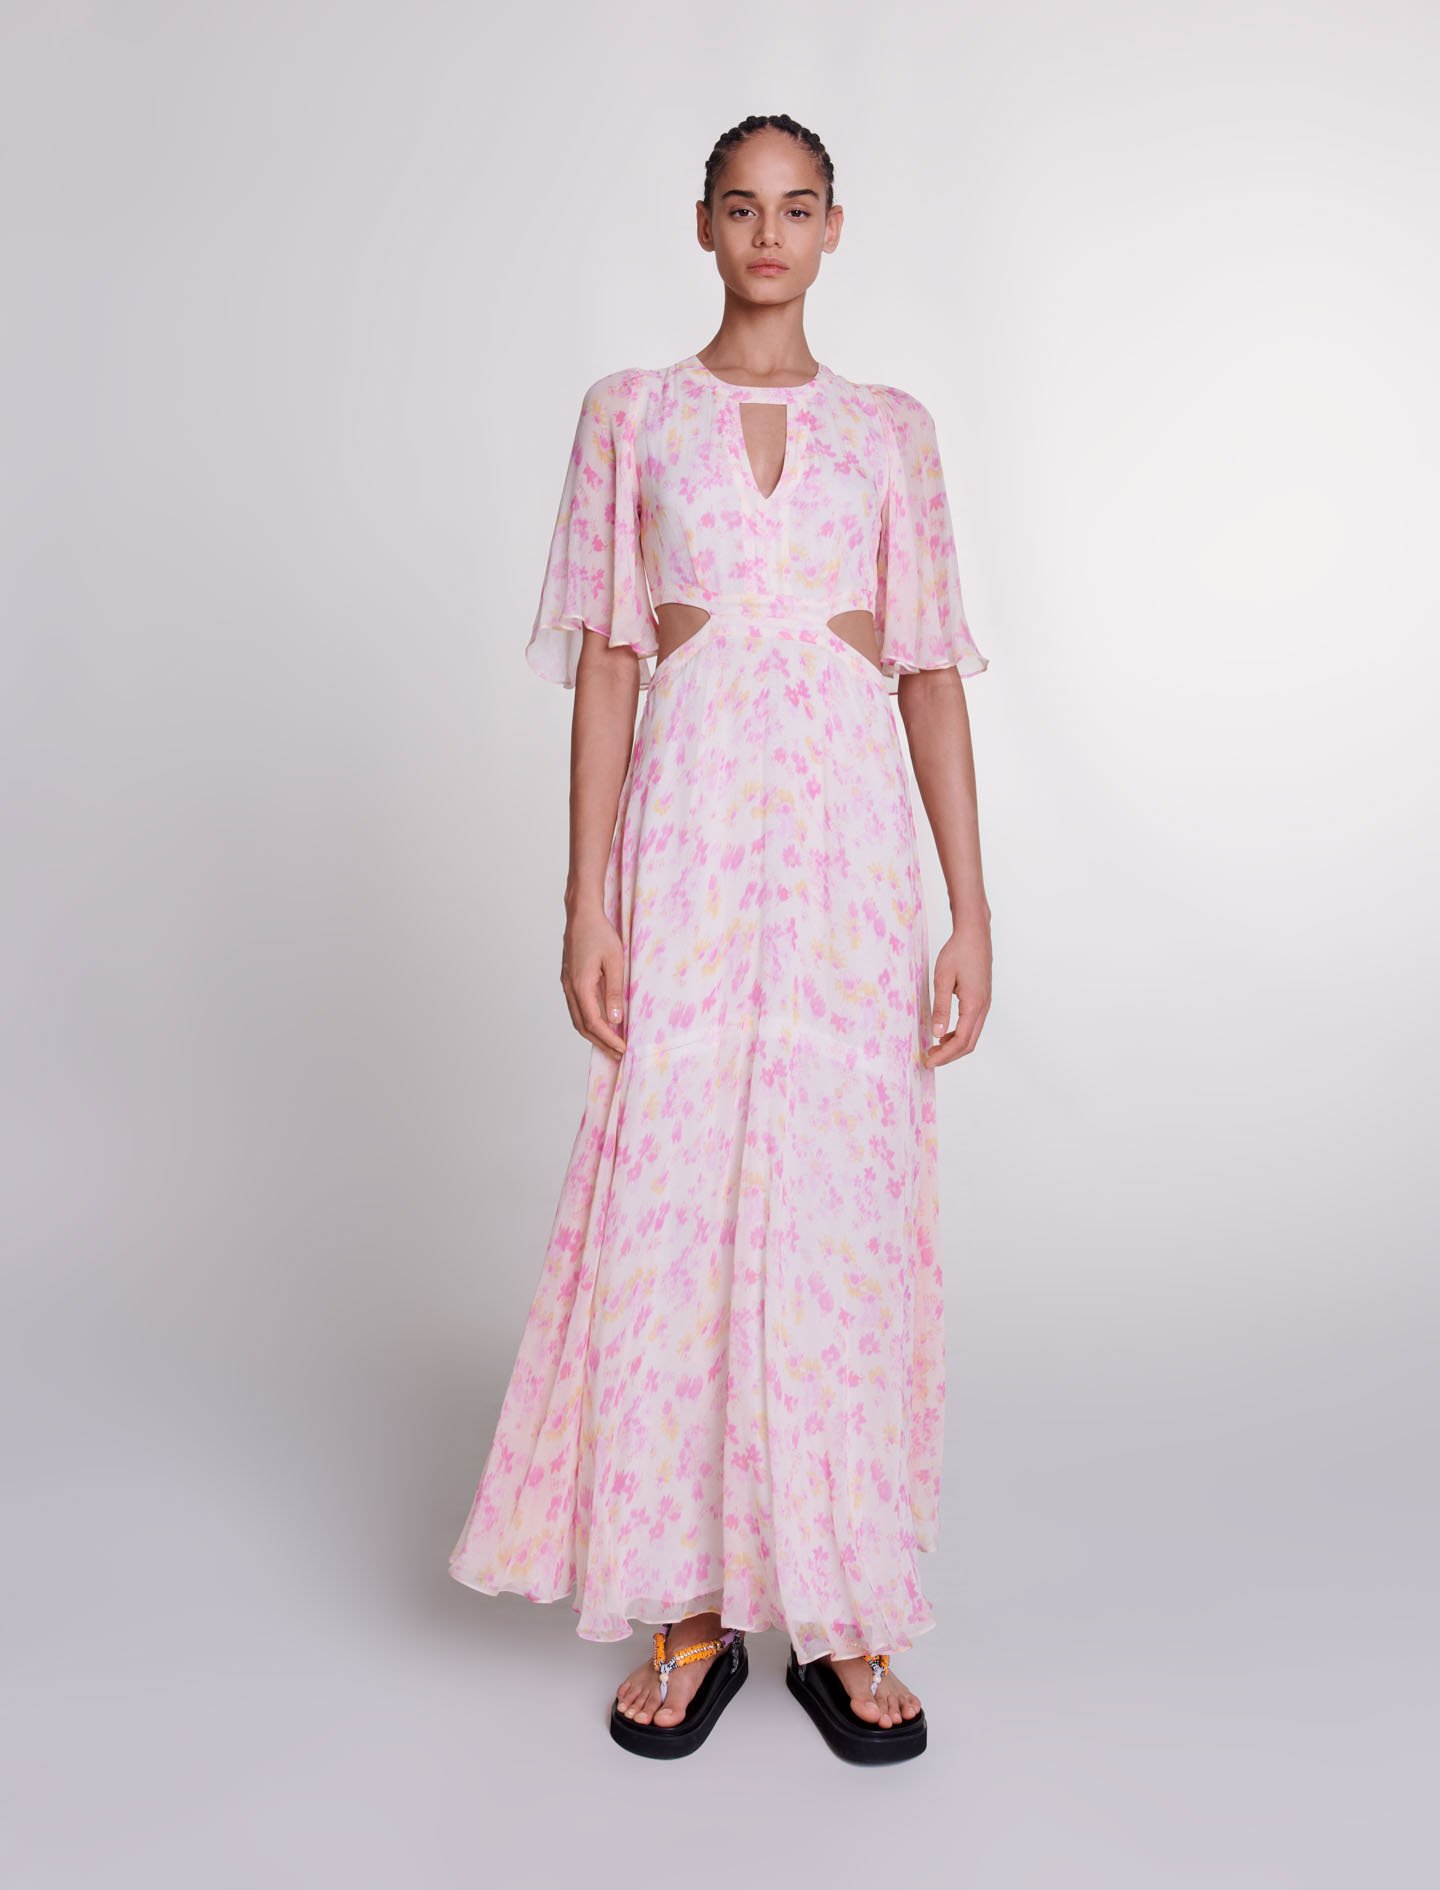 Mixte's viscose Lining: Floral print maxi dress for Spring/Summer, size Mixte-Dresses-US XL / FR 41, in color Pink Flower Print /